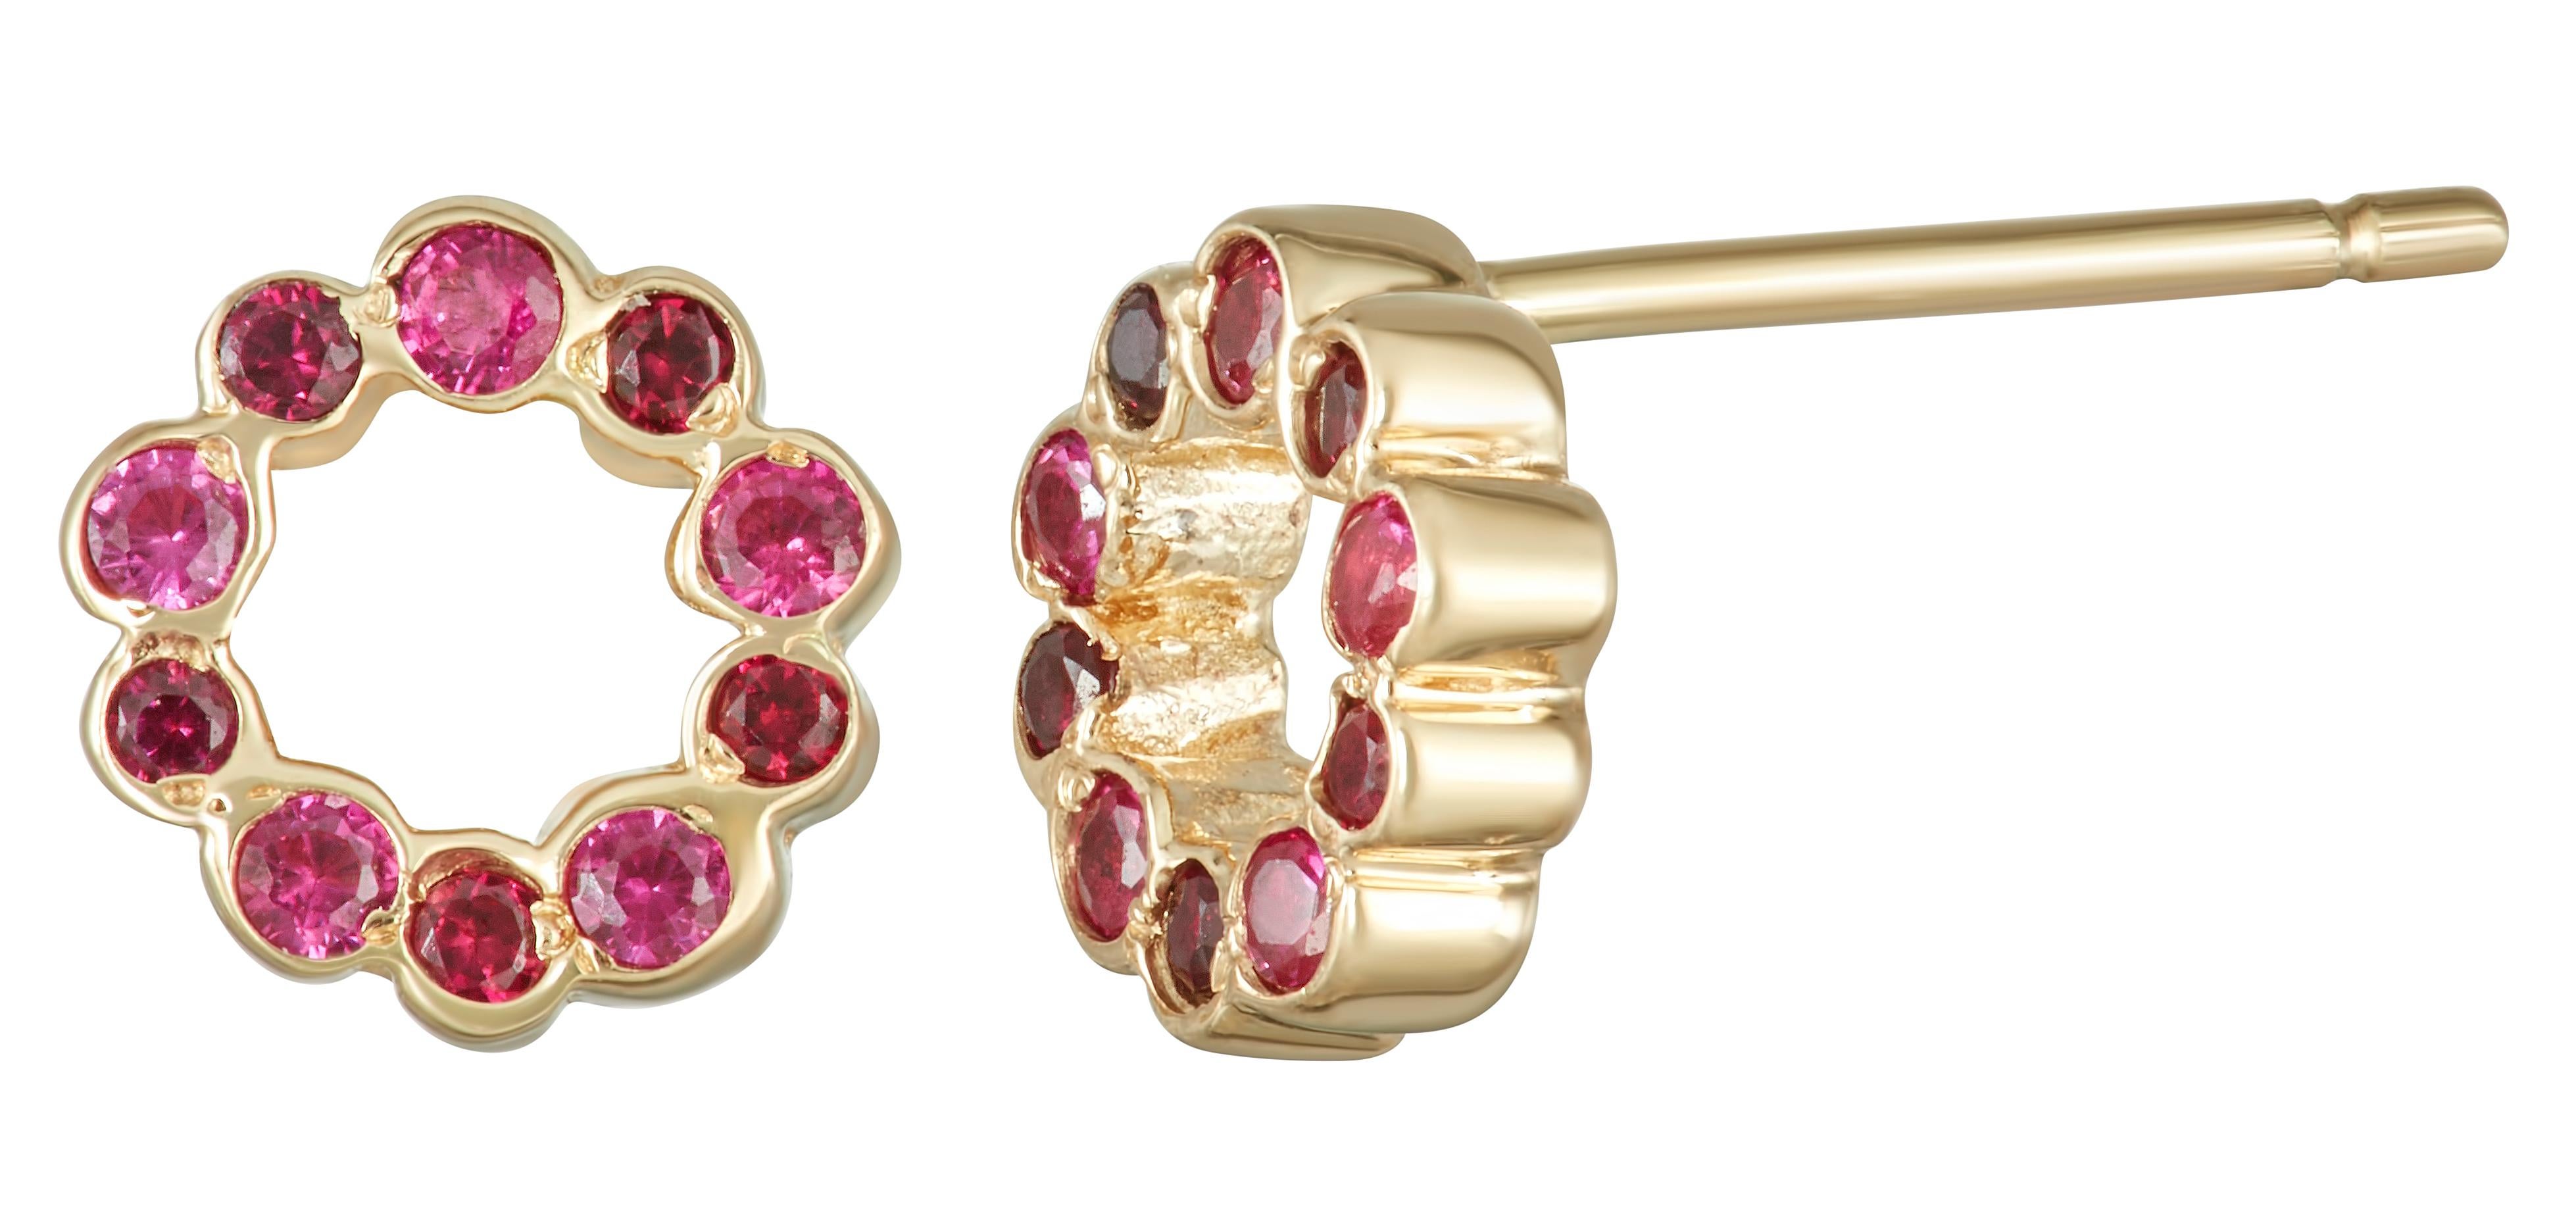 Contemporary Single 14 Karat Yellow Gold with Rubies Stud Earrings